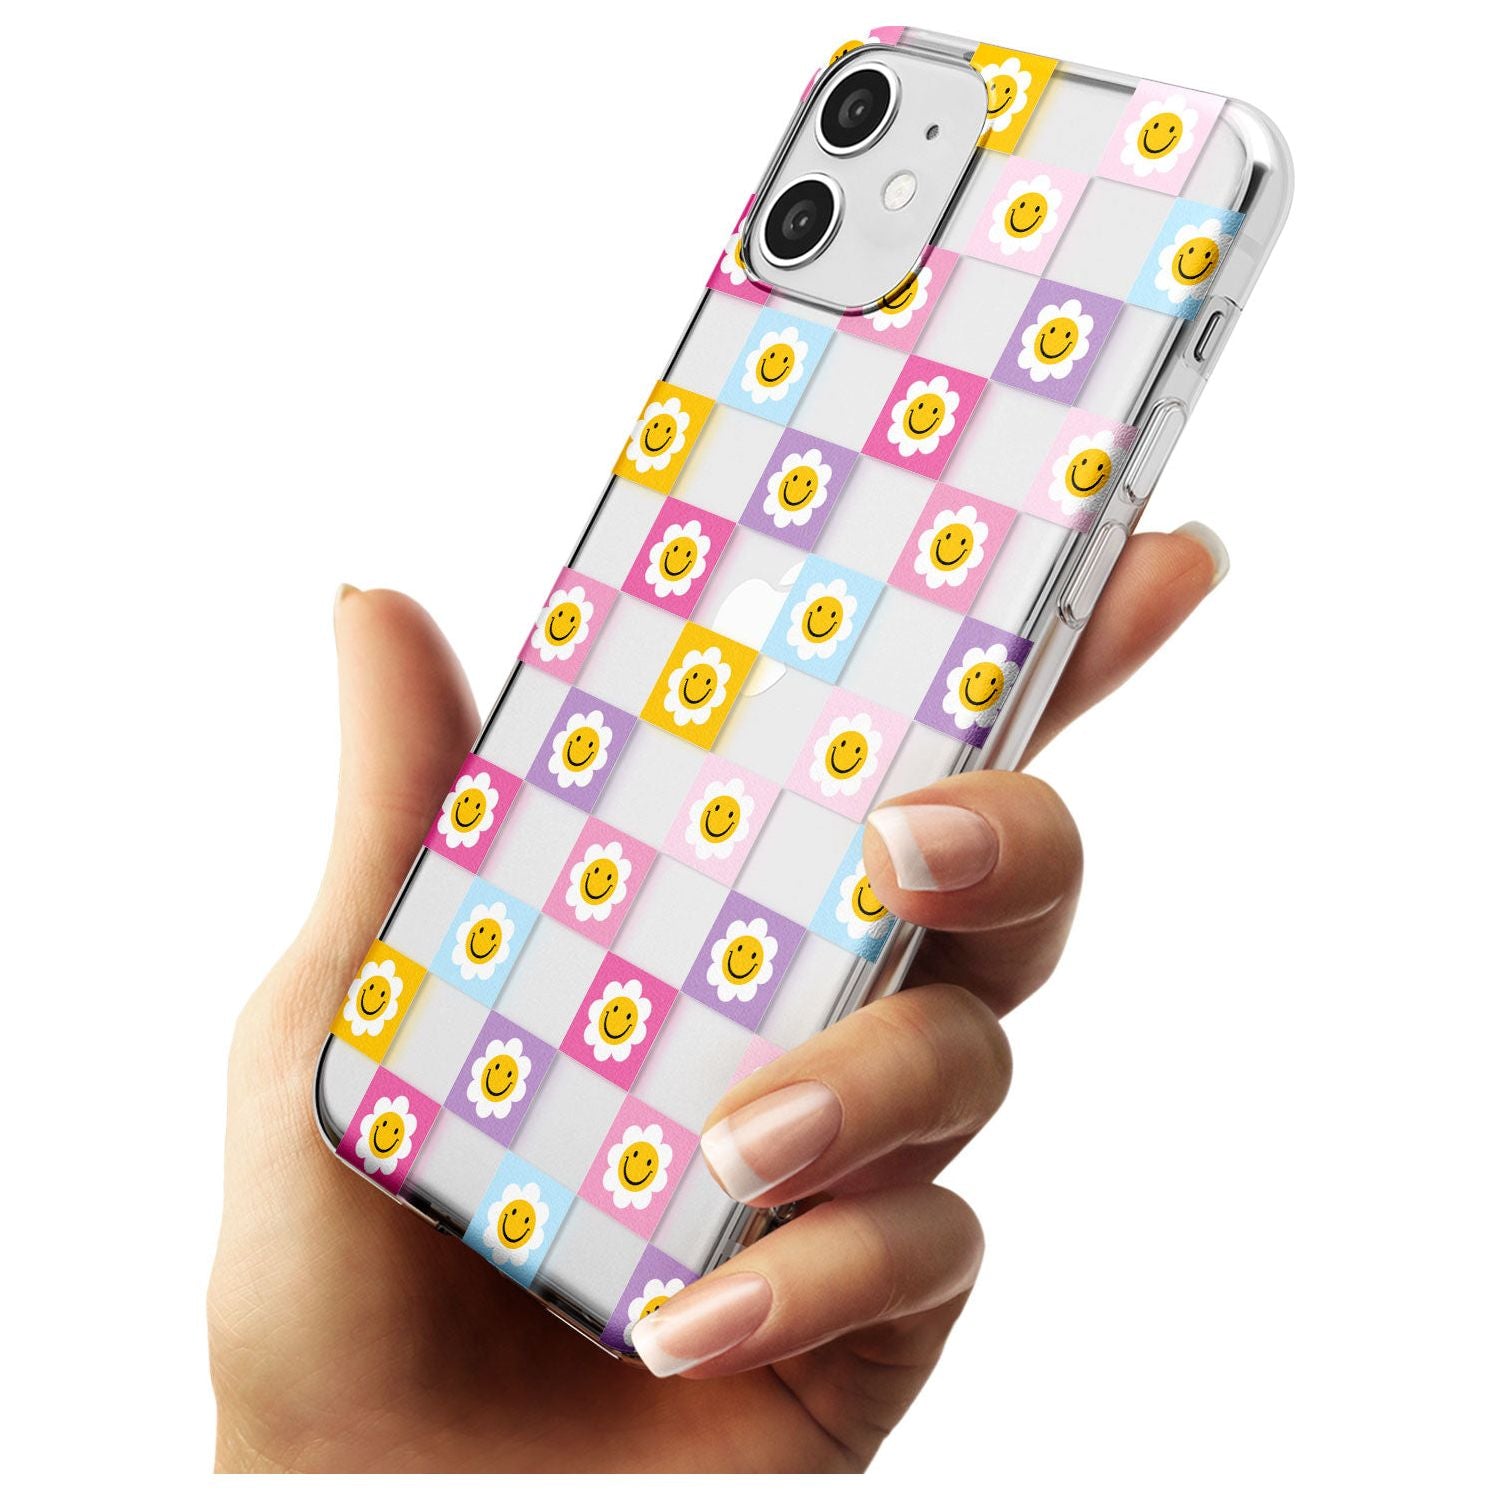 Daisy Squares Pattern Slim TPU Phone Case for iPhone 11